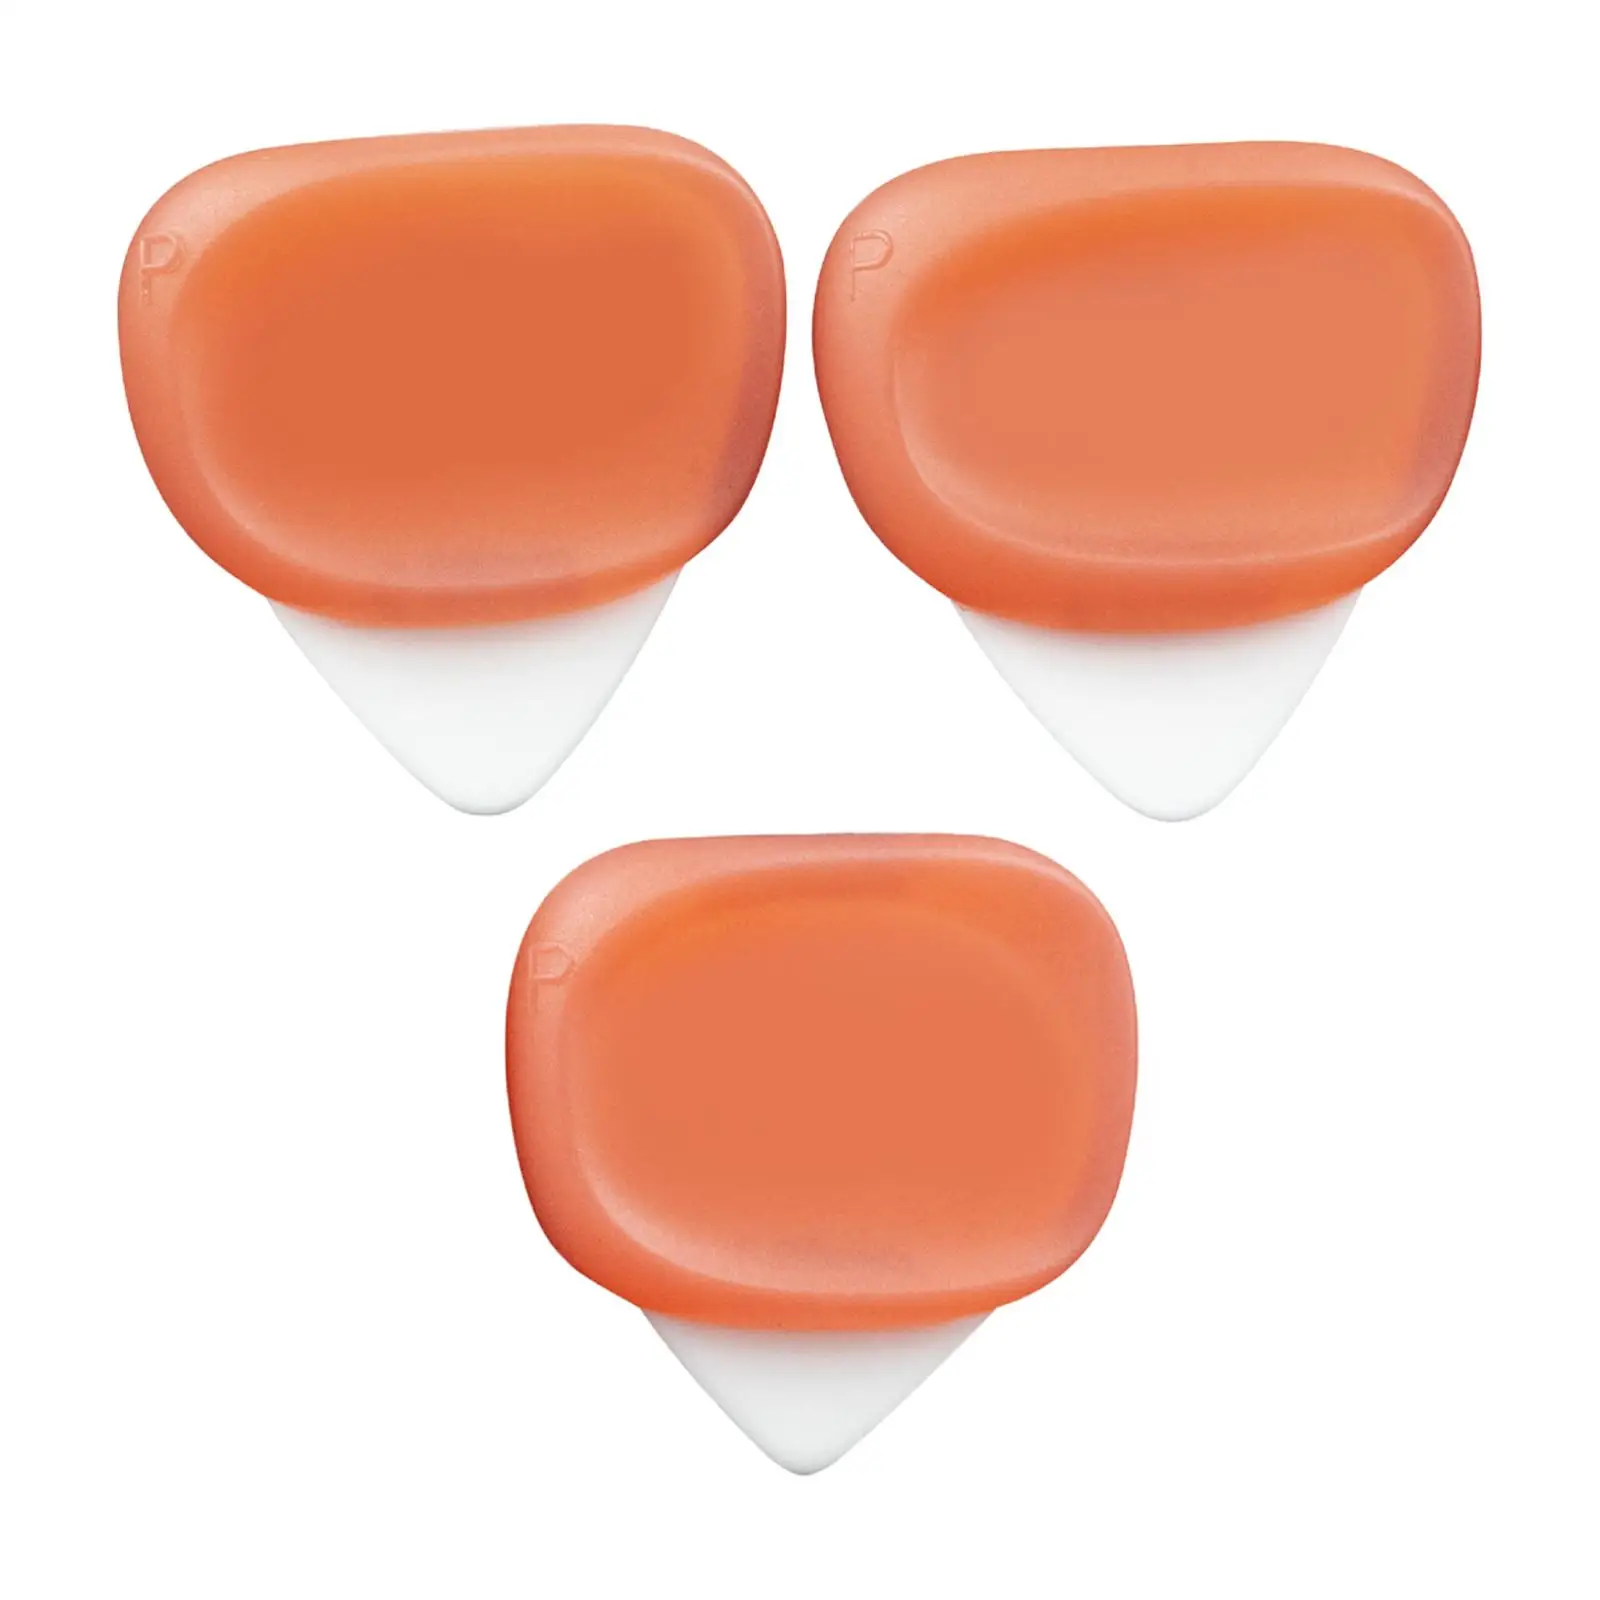 3 Guitar Picks 0.6/0.96/1.2mm Thickness, Acoustic Electric Guitar Bass Picks Plectrums, Slicone